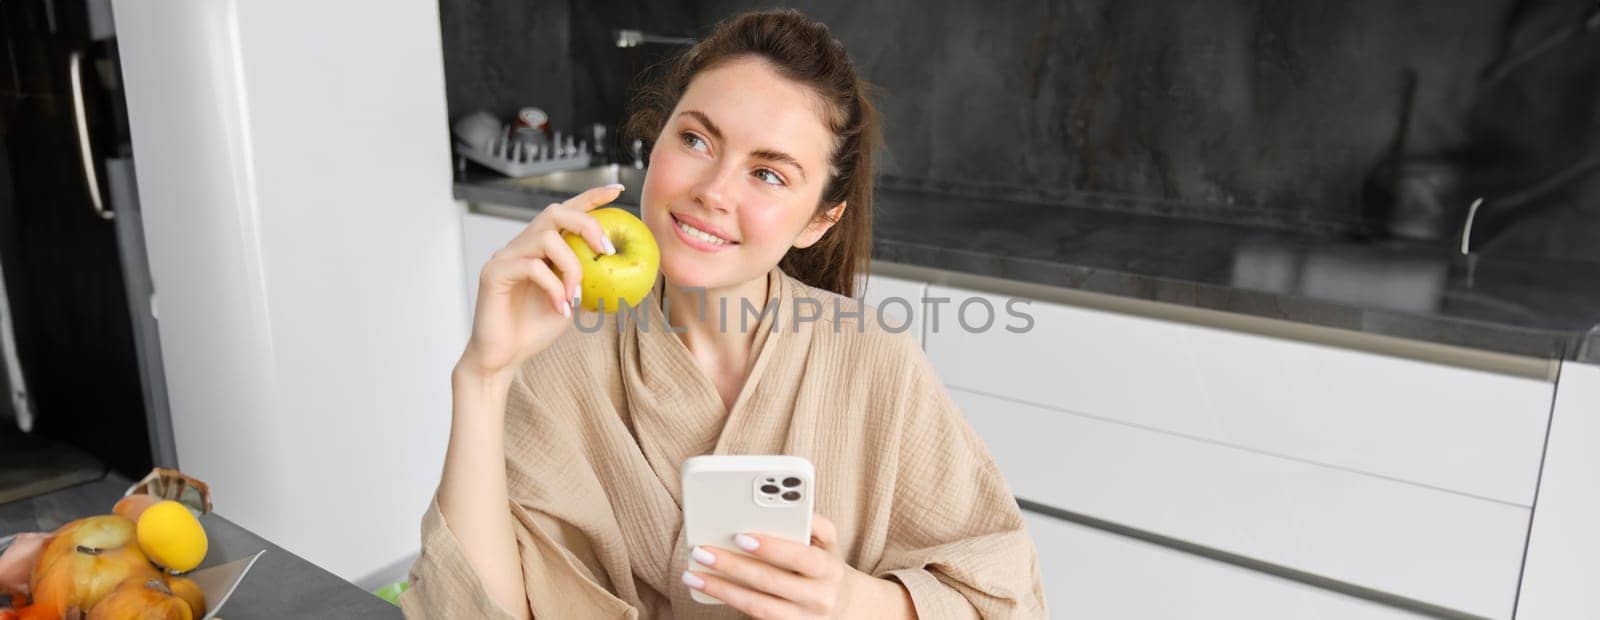 Close up portrait of happy young woman in bathrobe, sitting in the kitchen and using mobile phone, holding an apple, order fruits and vegetables online, using smartphone app for groceries delivery.